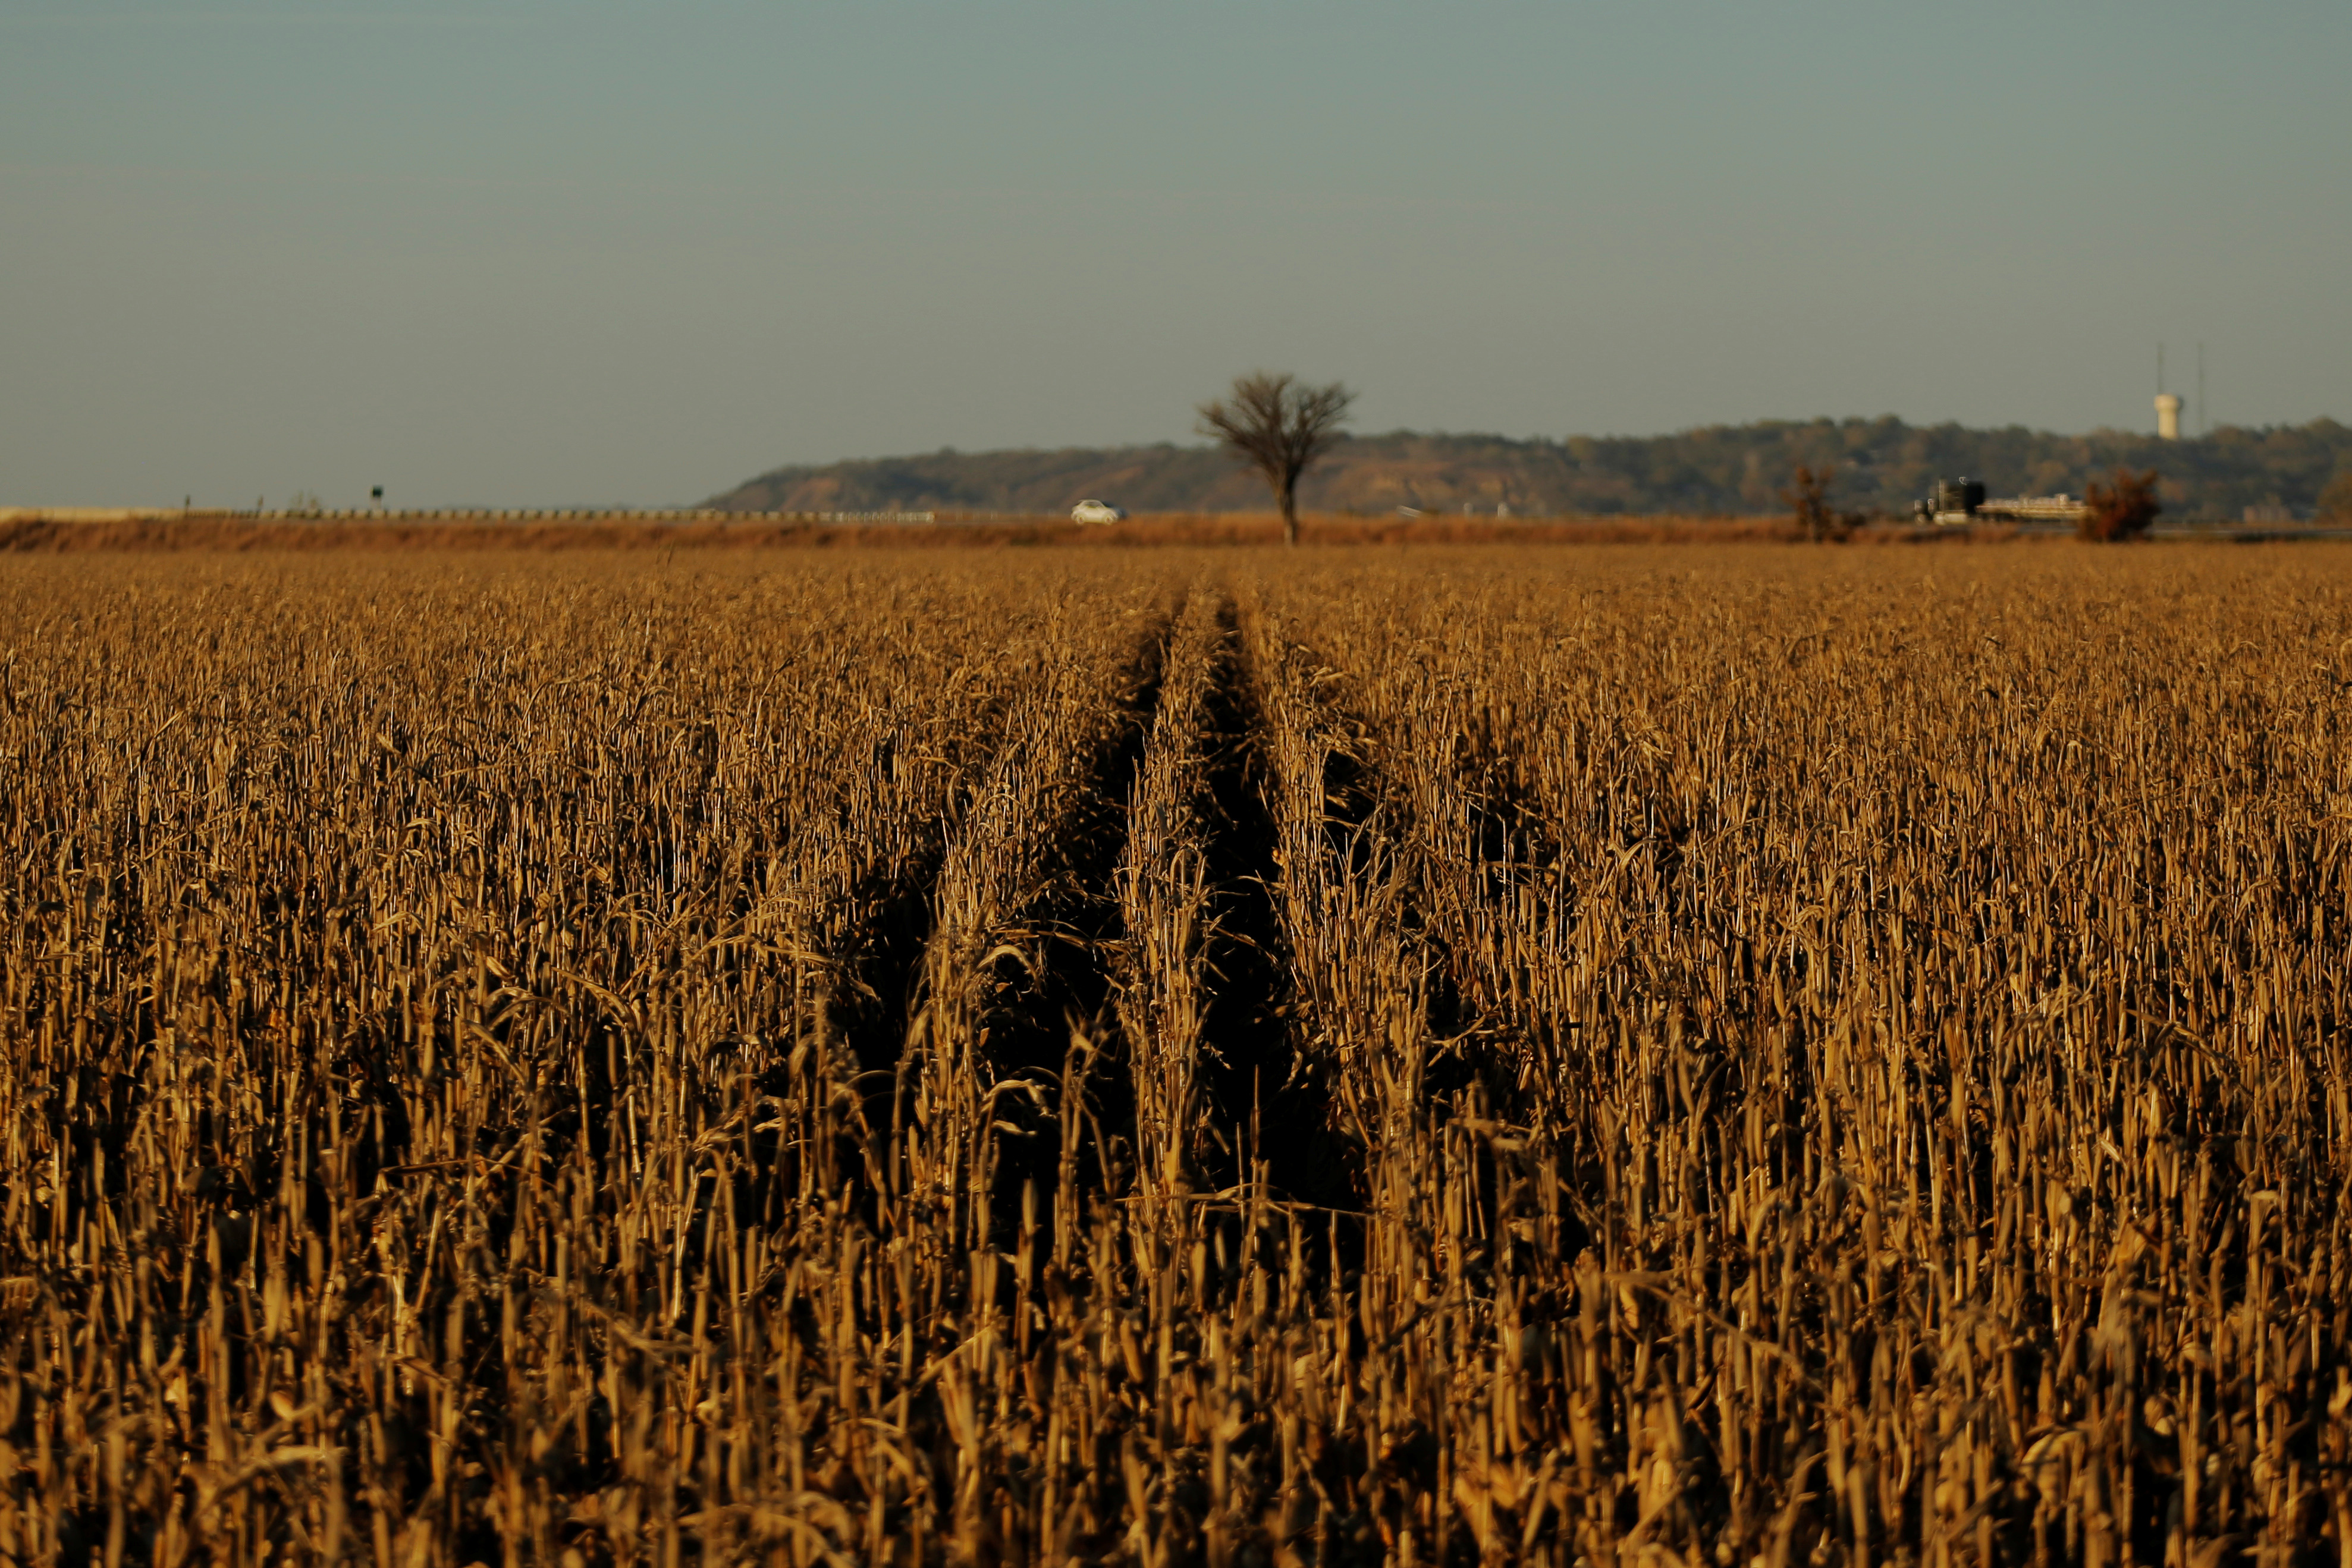 The setting sun lights a corn field waiting to be harvested near Defiance, Iowa